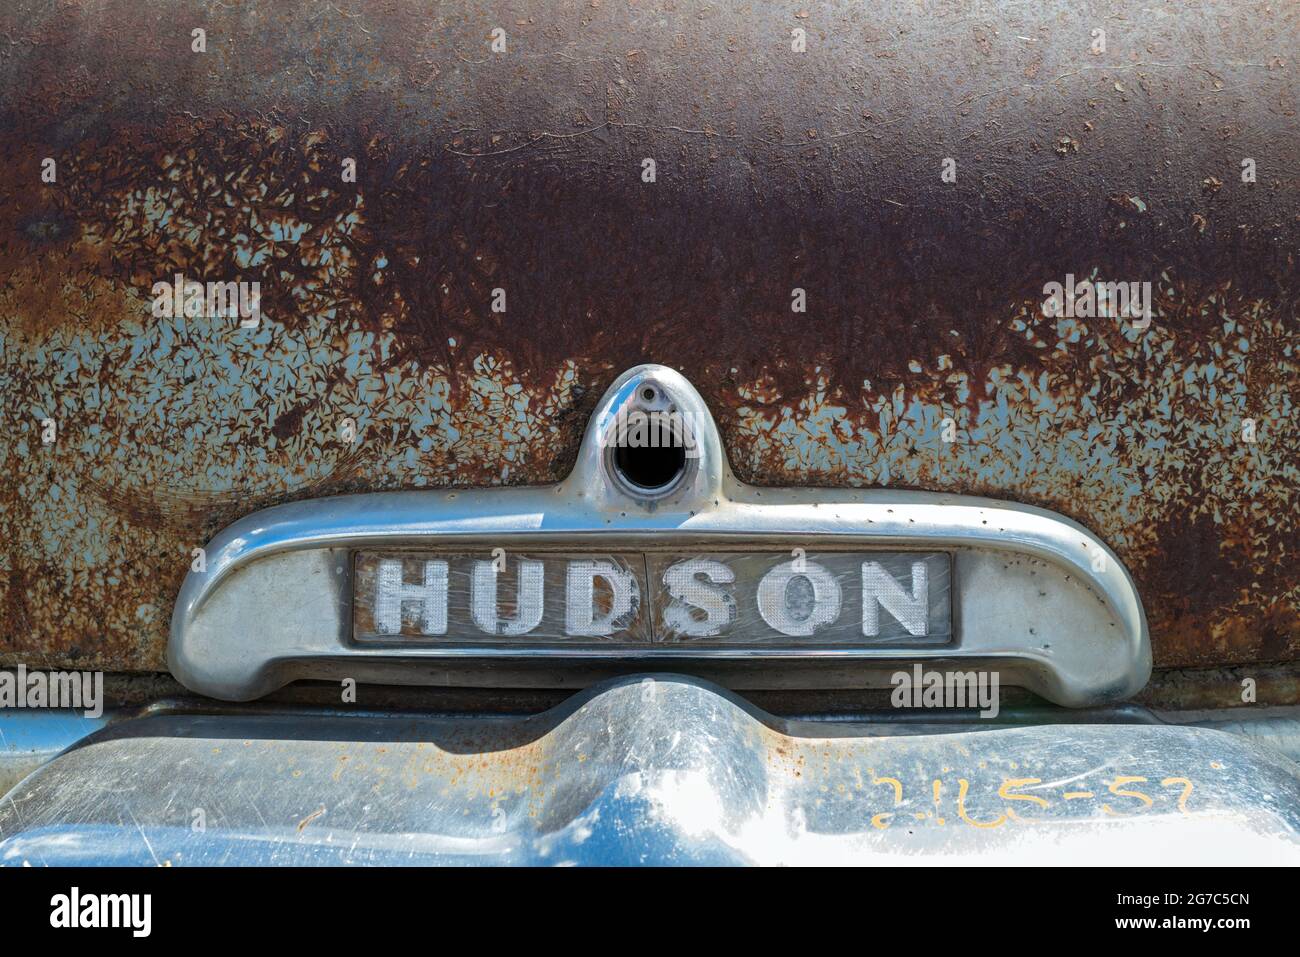 The trunk latch of a 1952 Hudson Commodore 8 car parked in Pomeroy, Washington, USA Stock Photo